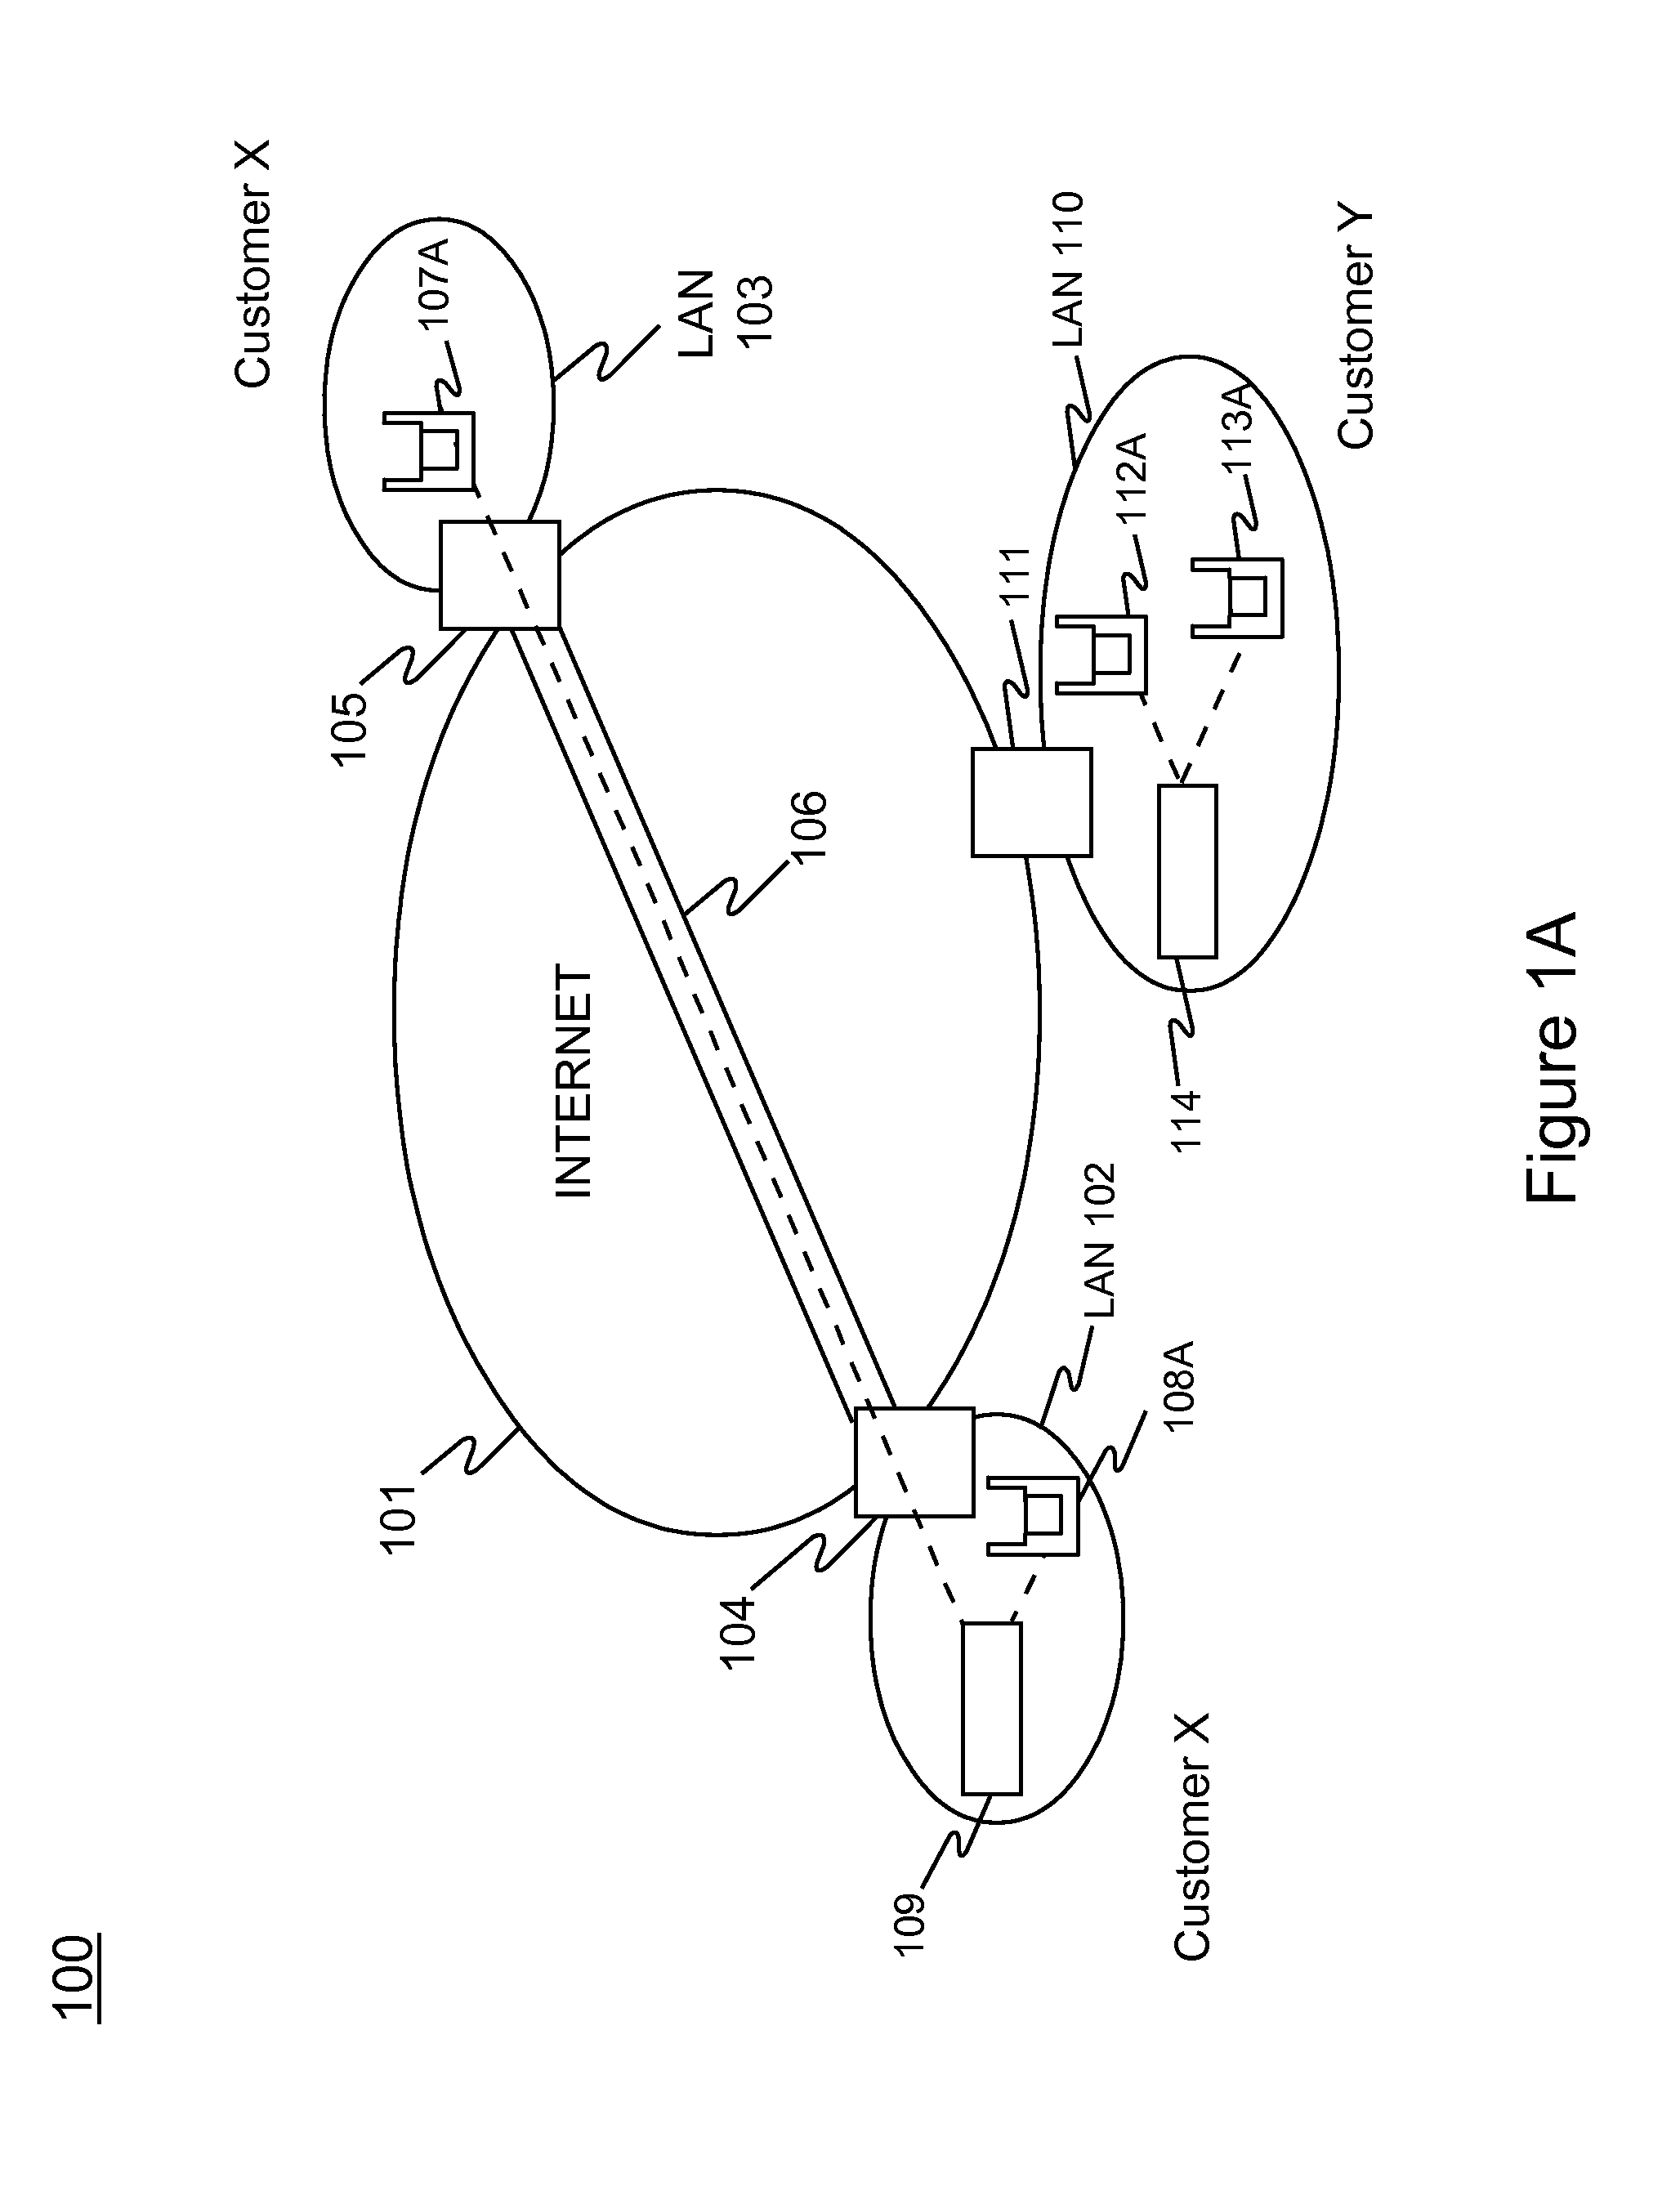 Method and system for providing wireless vulnerability management for local area computer networks